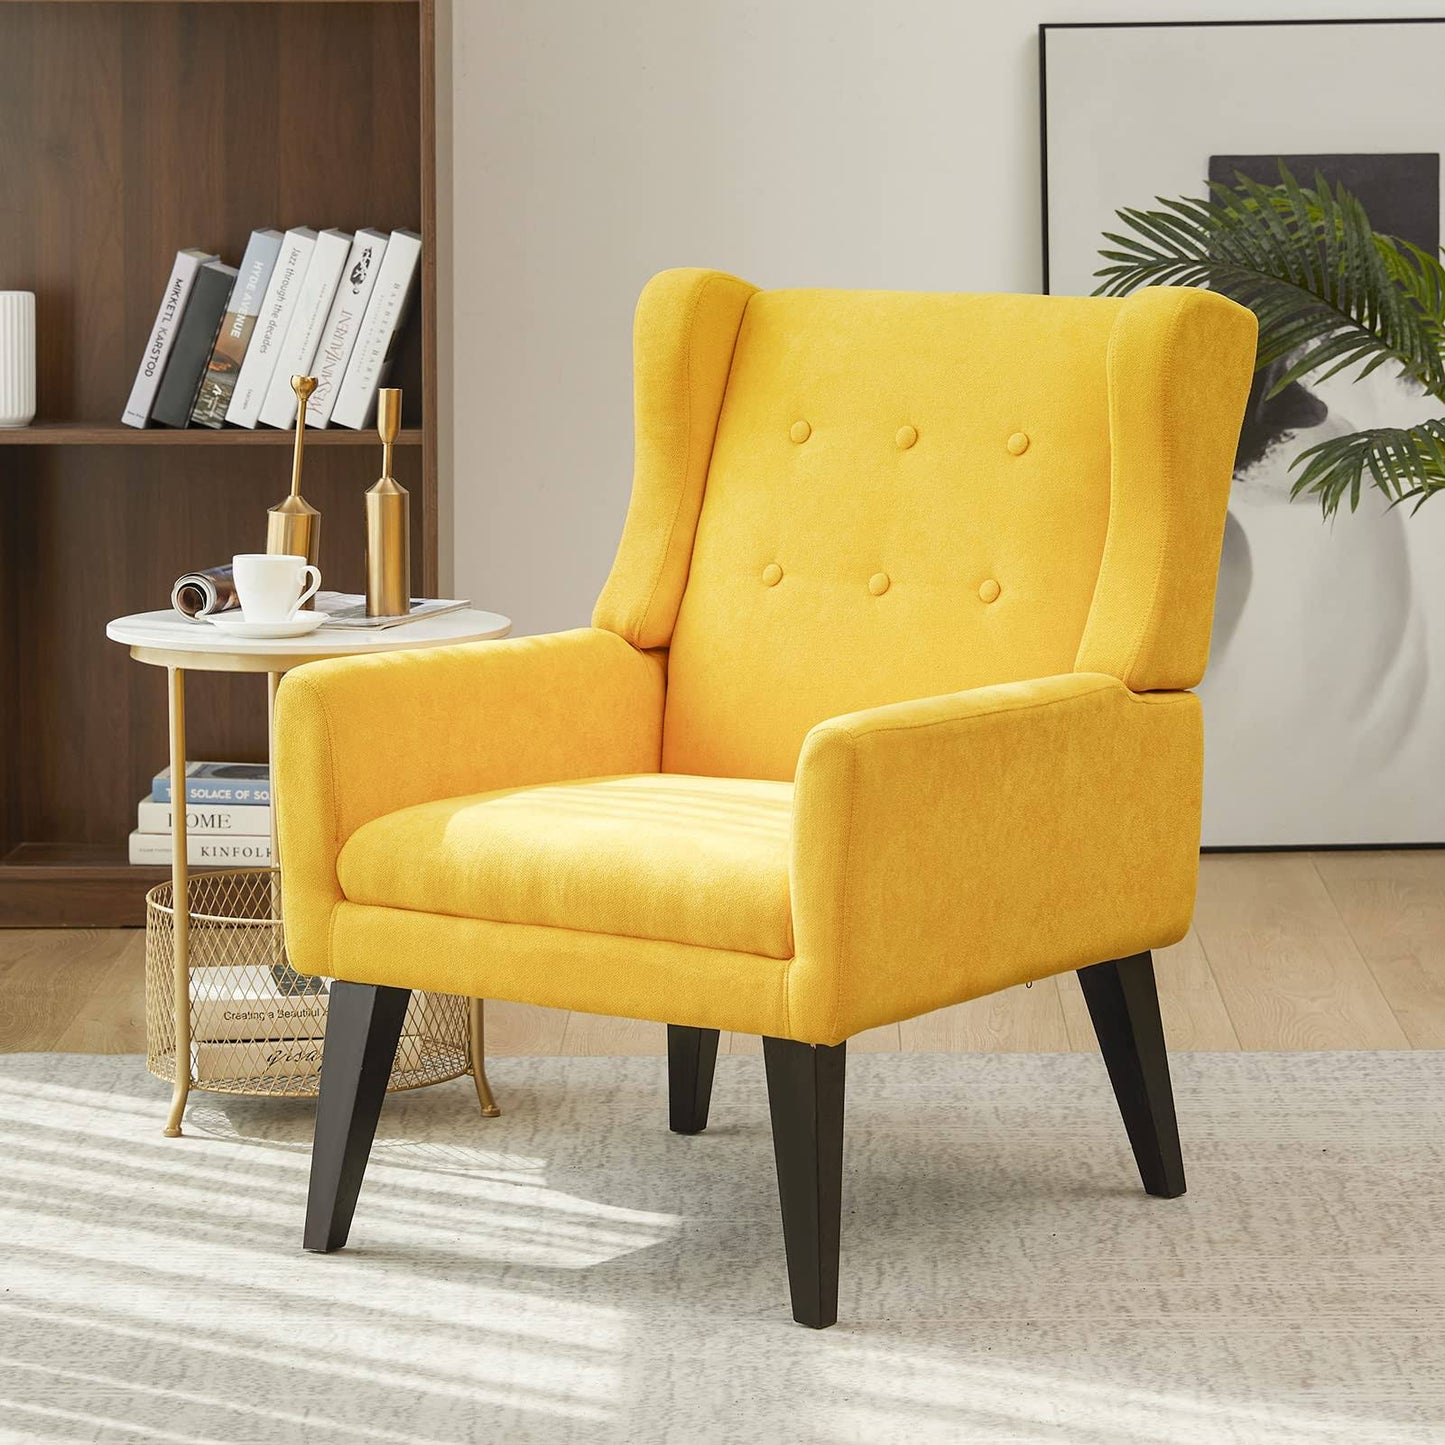 Upholstered Accent Chair,Mid Century Modern Fabric Armchair,Comfy Wingback Chairs For Living Room Bedroom(Yellow)